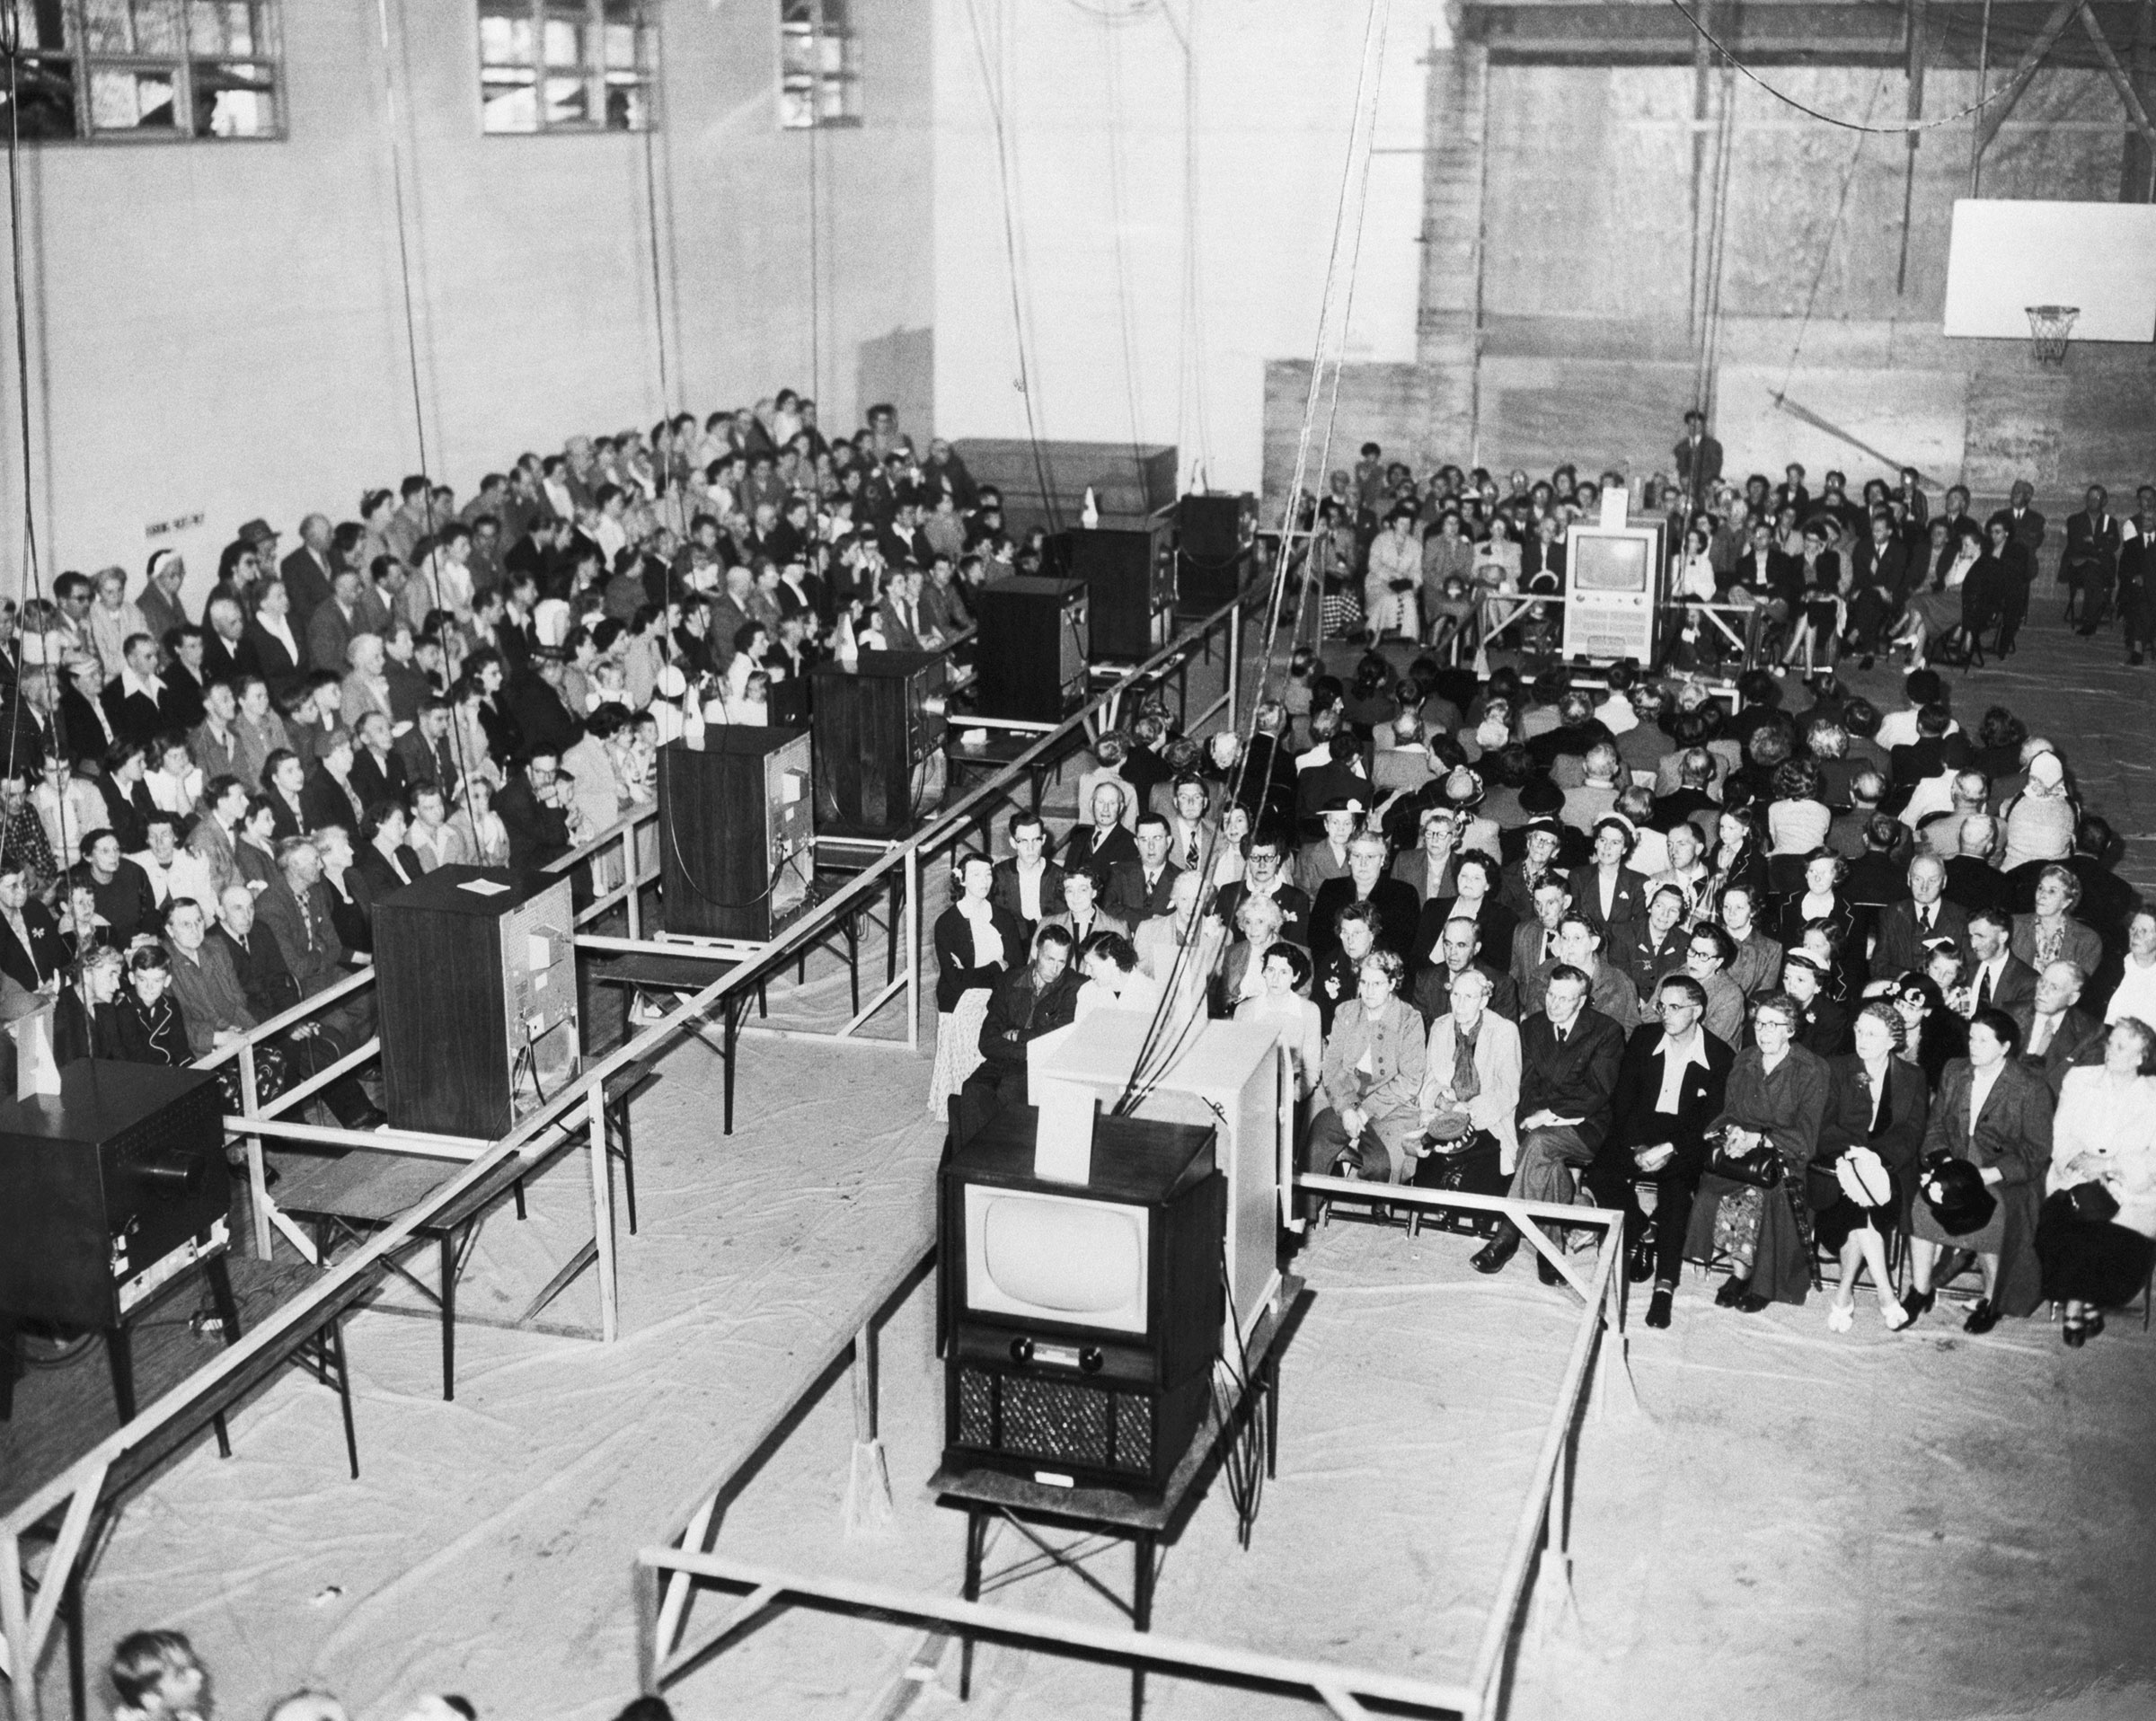 A TV hook-up in Marpole Community Centre, Vancouver allows over 1200 people to see the coronation of Queen Elizabeth II as televised from London. (Bettmann Archive/Getty Images)